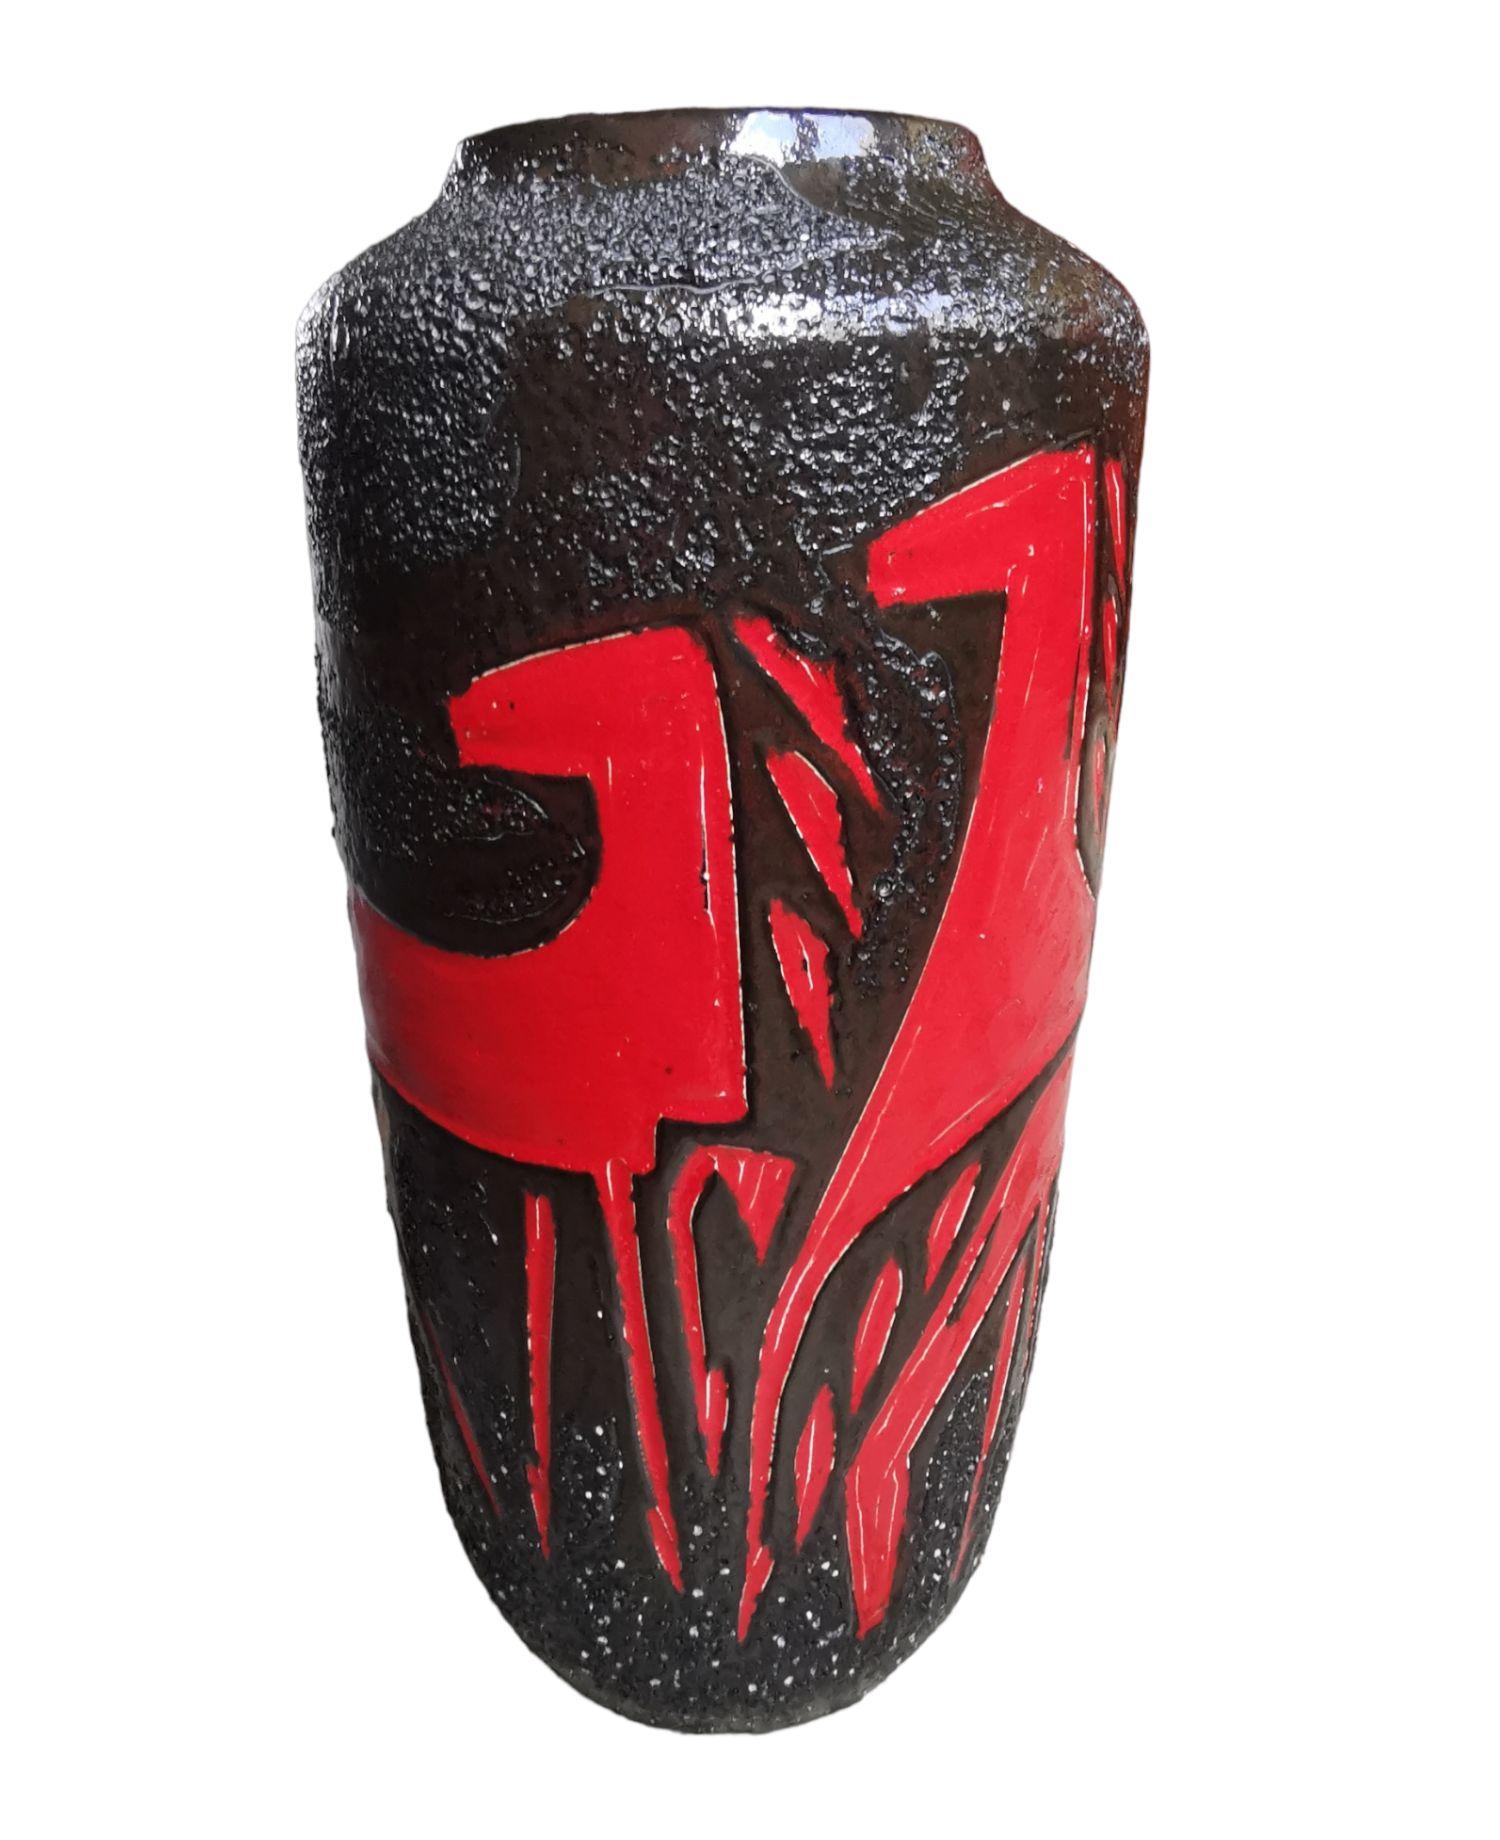 Rare, big floor vase by Scheurich Germany with Fat Lava glaze and red horses.
 
Model 517-45
Measures : 45 cm / 17.7 inch high.
22 cm / 8.66 inch diameter 
 
Well preserved. As is often the case with the black glazes, the raised areas are